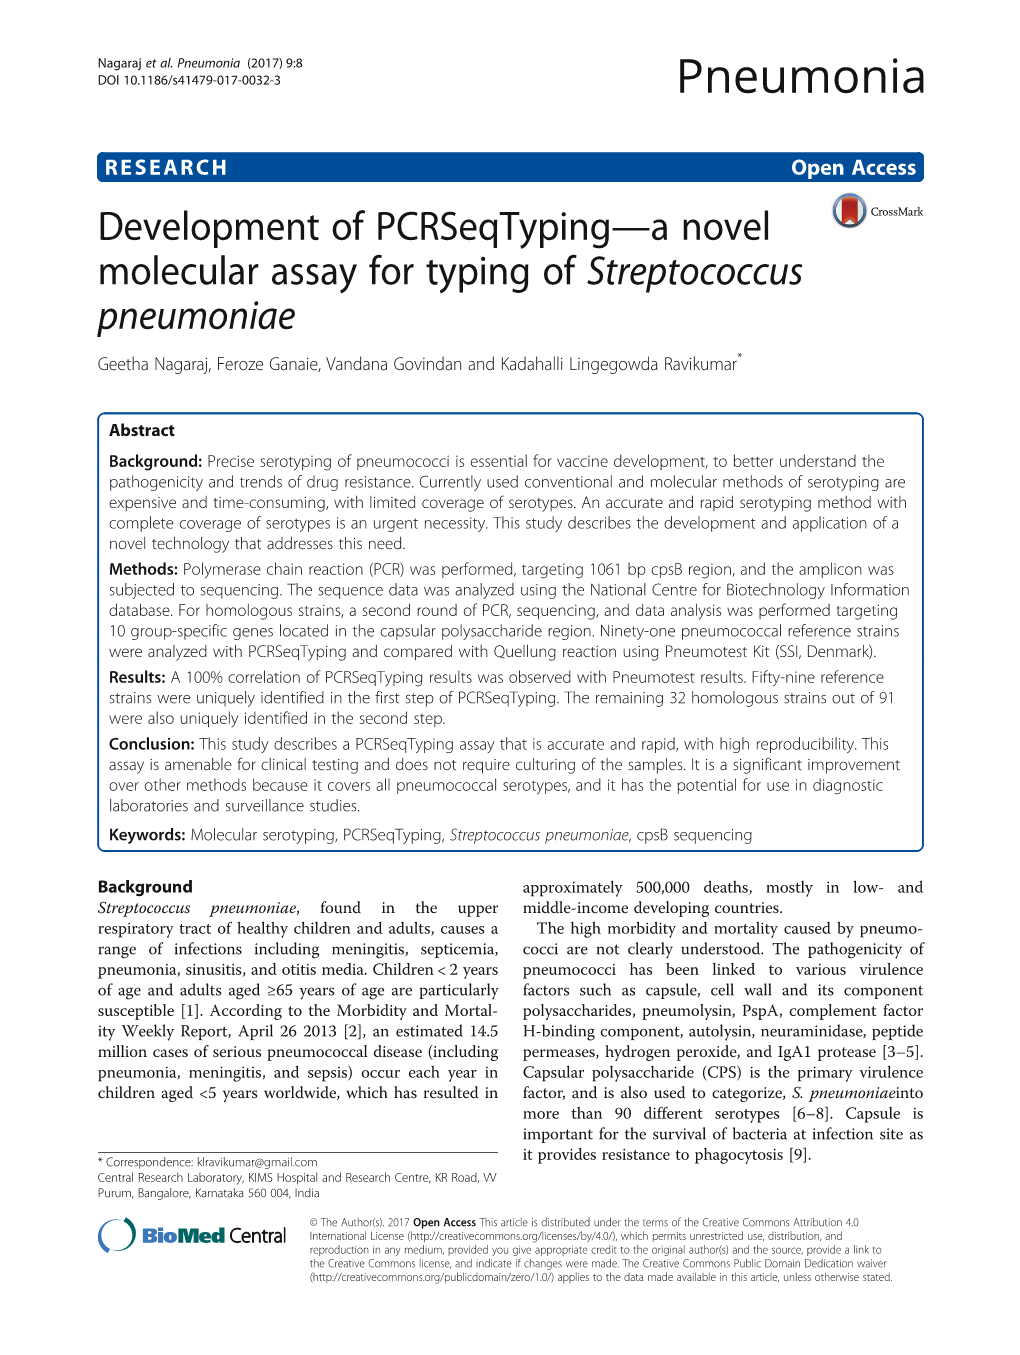 Development of Pcrseqtyping—A Novel Molecular Assay for Typing of Streptococcus Pneumoniae